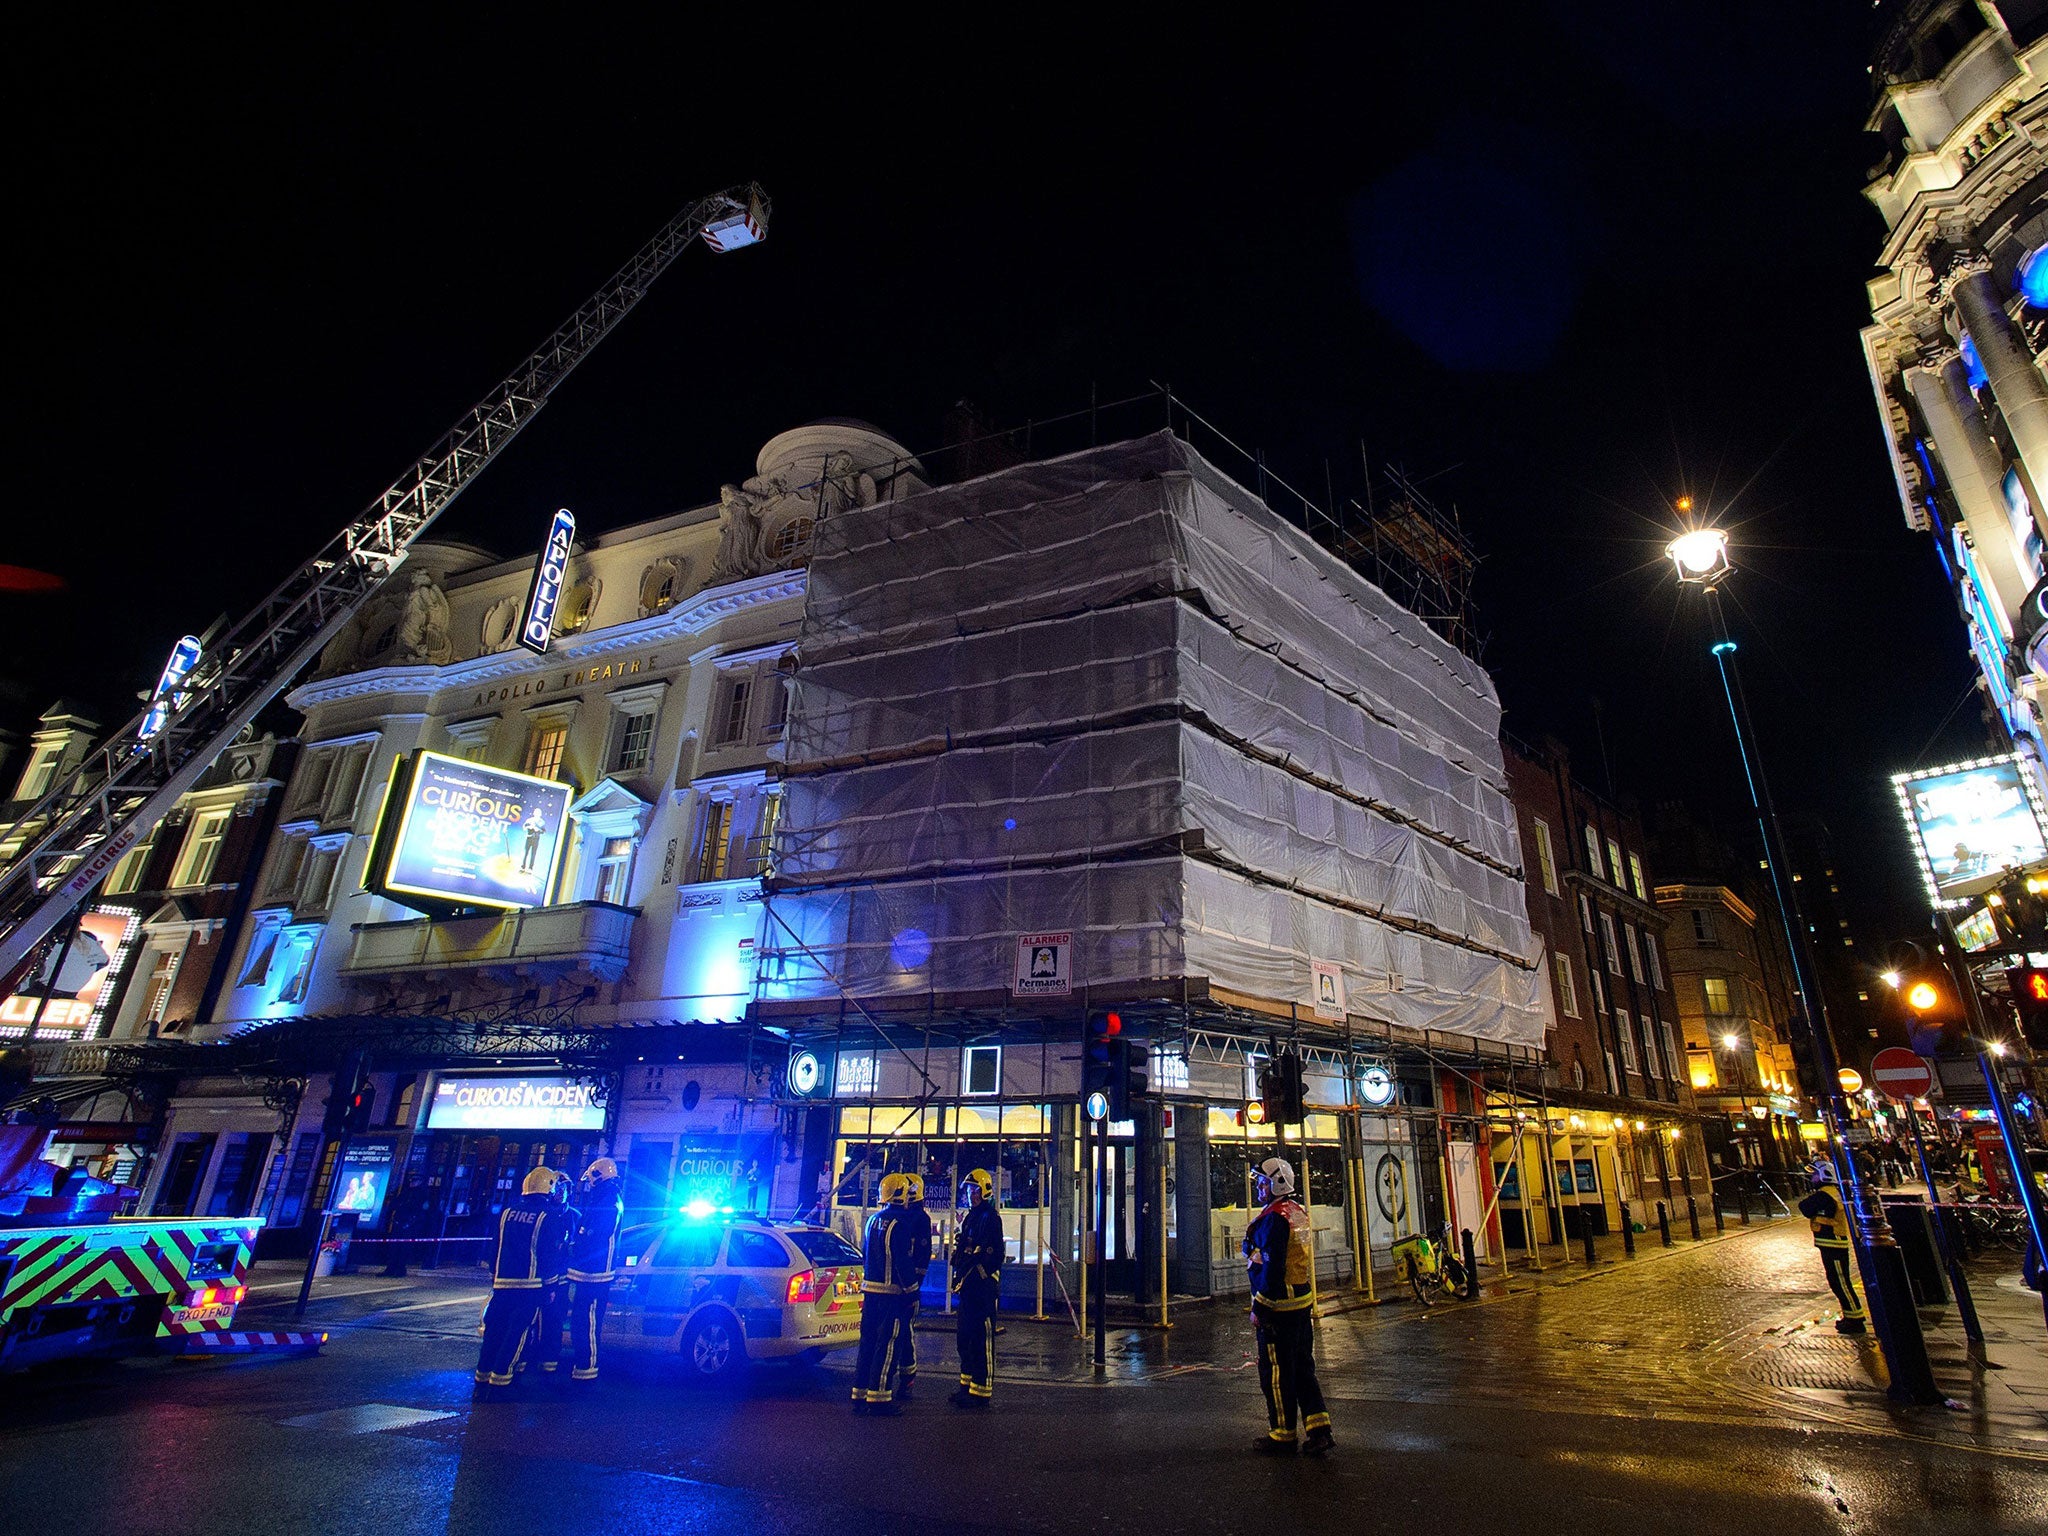 Emergency services at the Apollo on the night of the roof collapse in December,
during the adaptation of Mark Haddon's 'The Curious Incident of the Dog in the Night-Time'